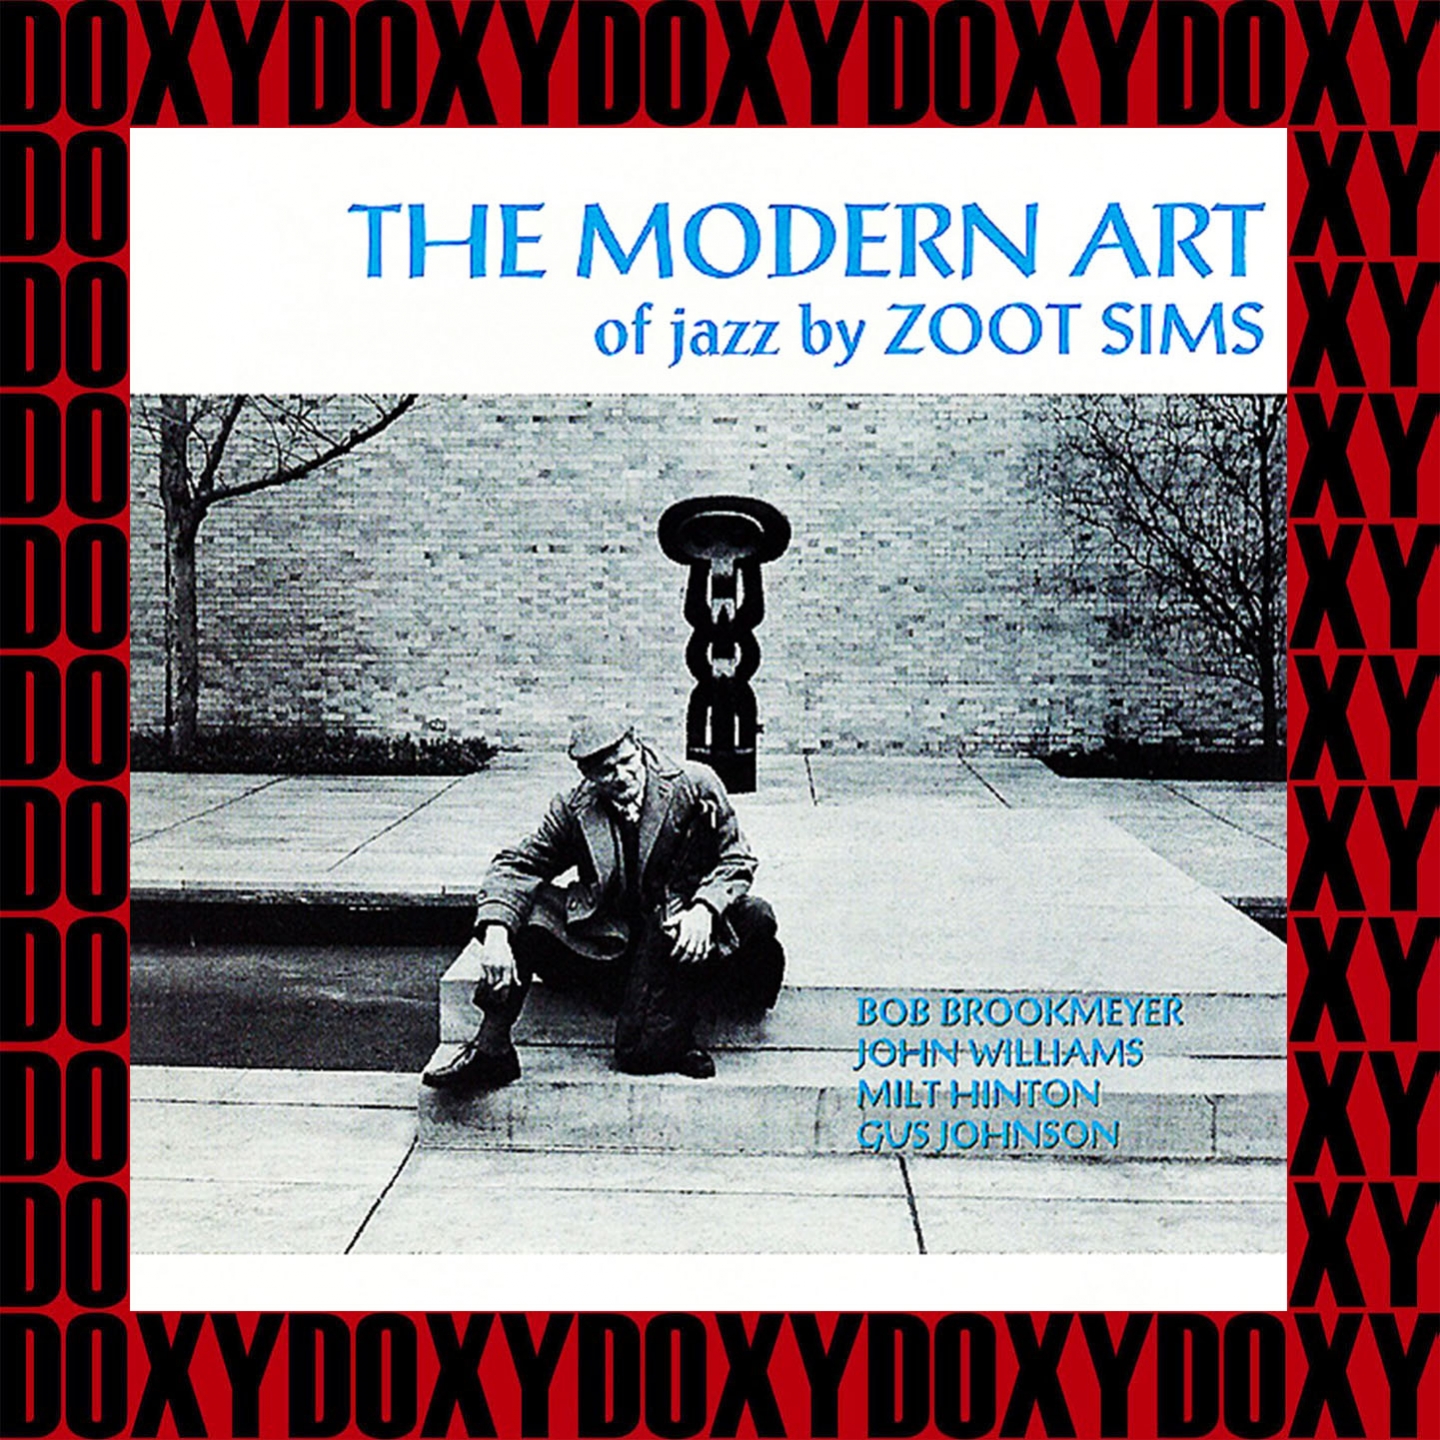 The Modern Art of Jazz (Remastered Version) (Doxy Collection)